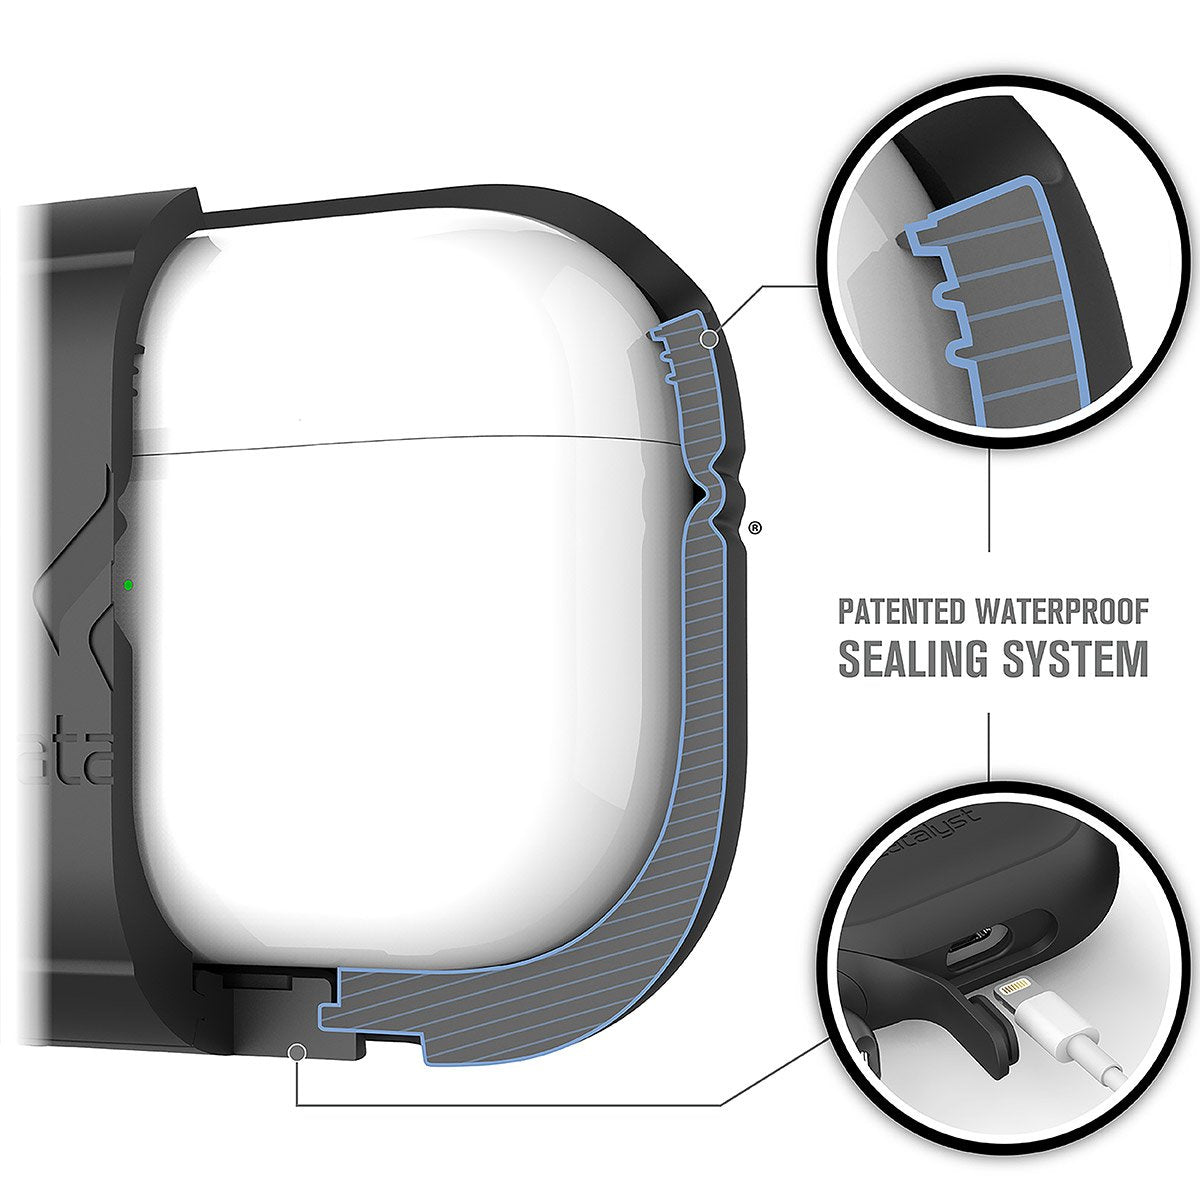 CATAPDPROBLK | catalyst airpods pro gen 2 1 waterproof case carabiner stealth black showing the patented waterproof sealing system texts reads patented waterproof sealing system